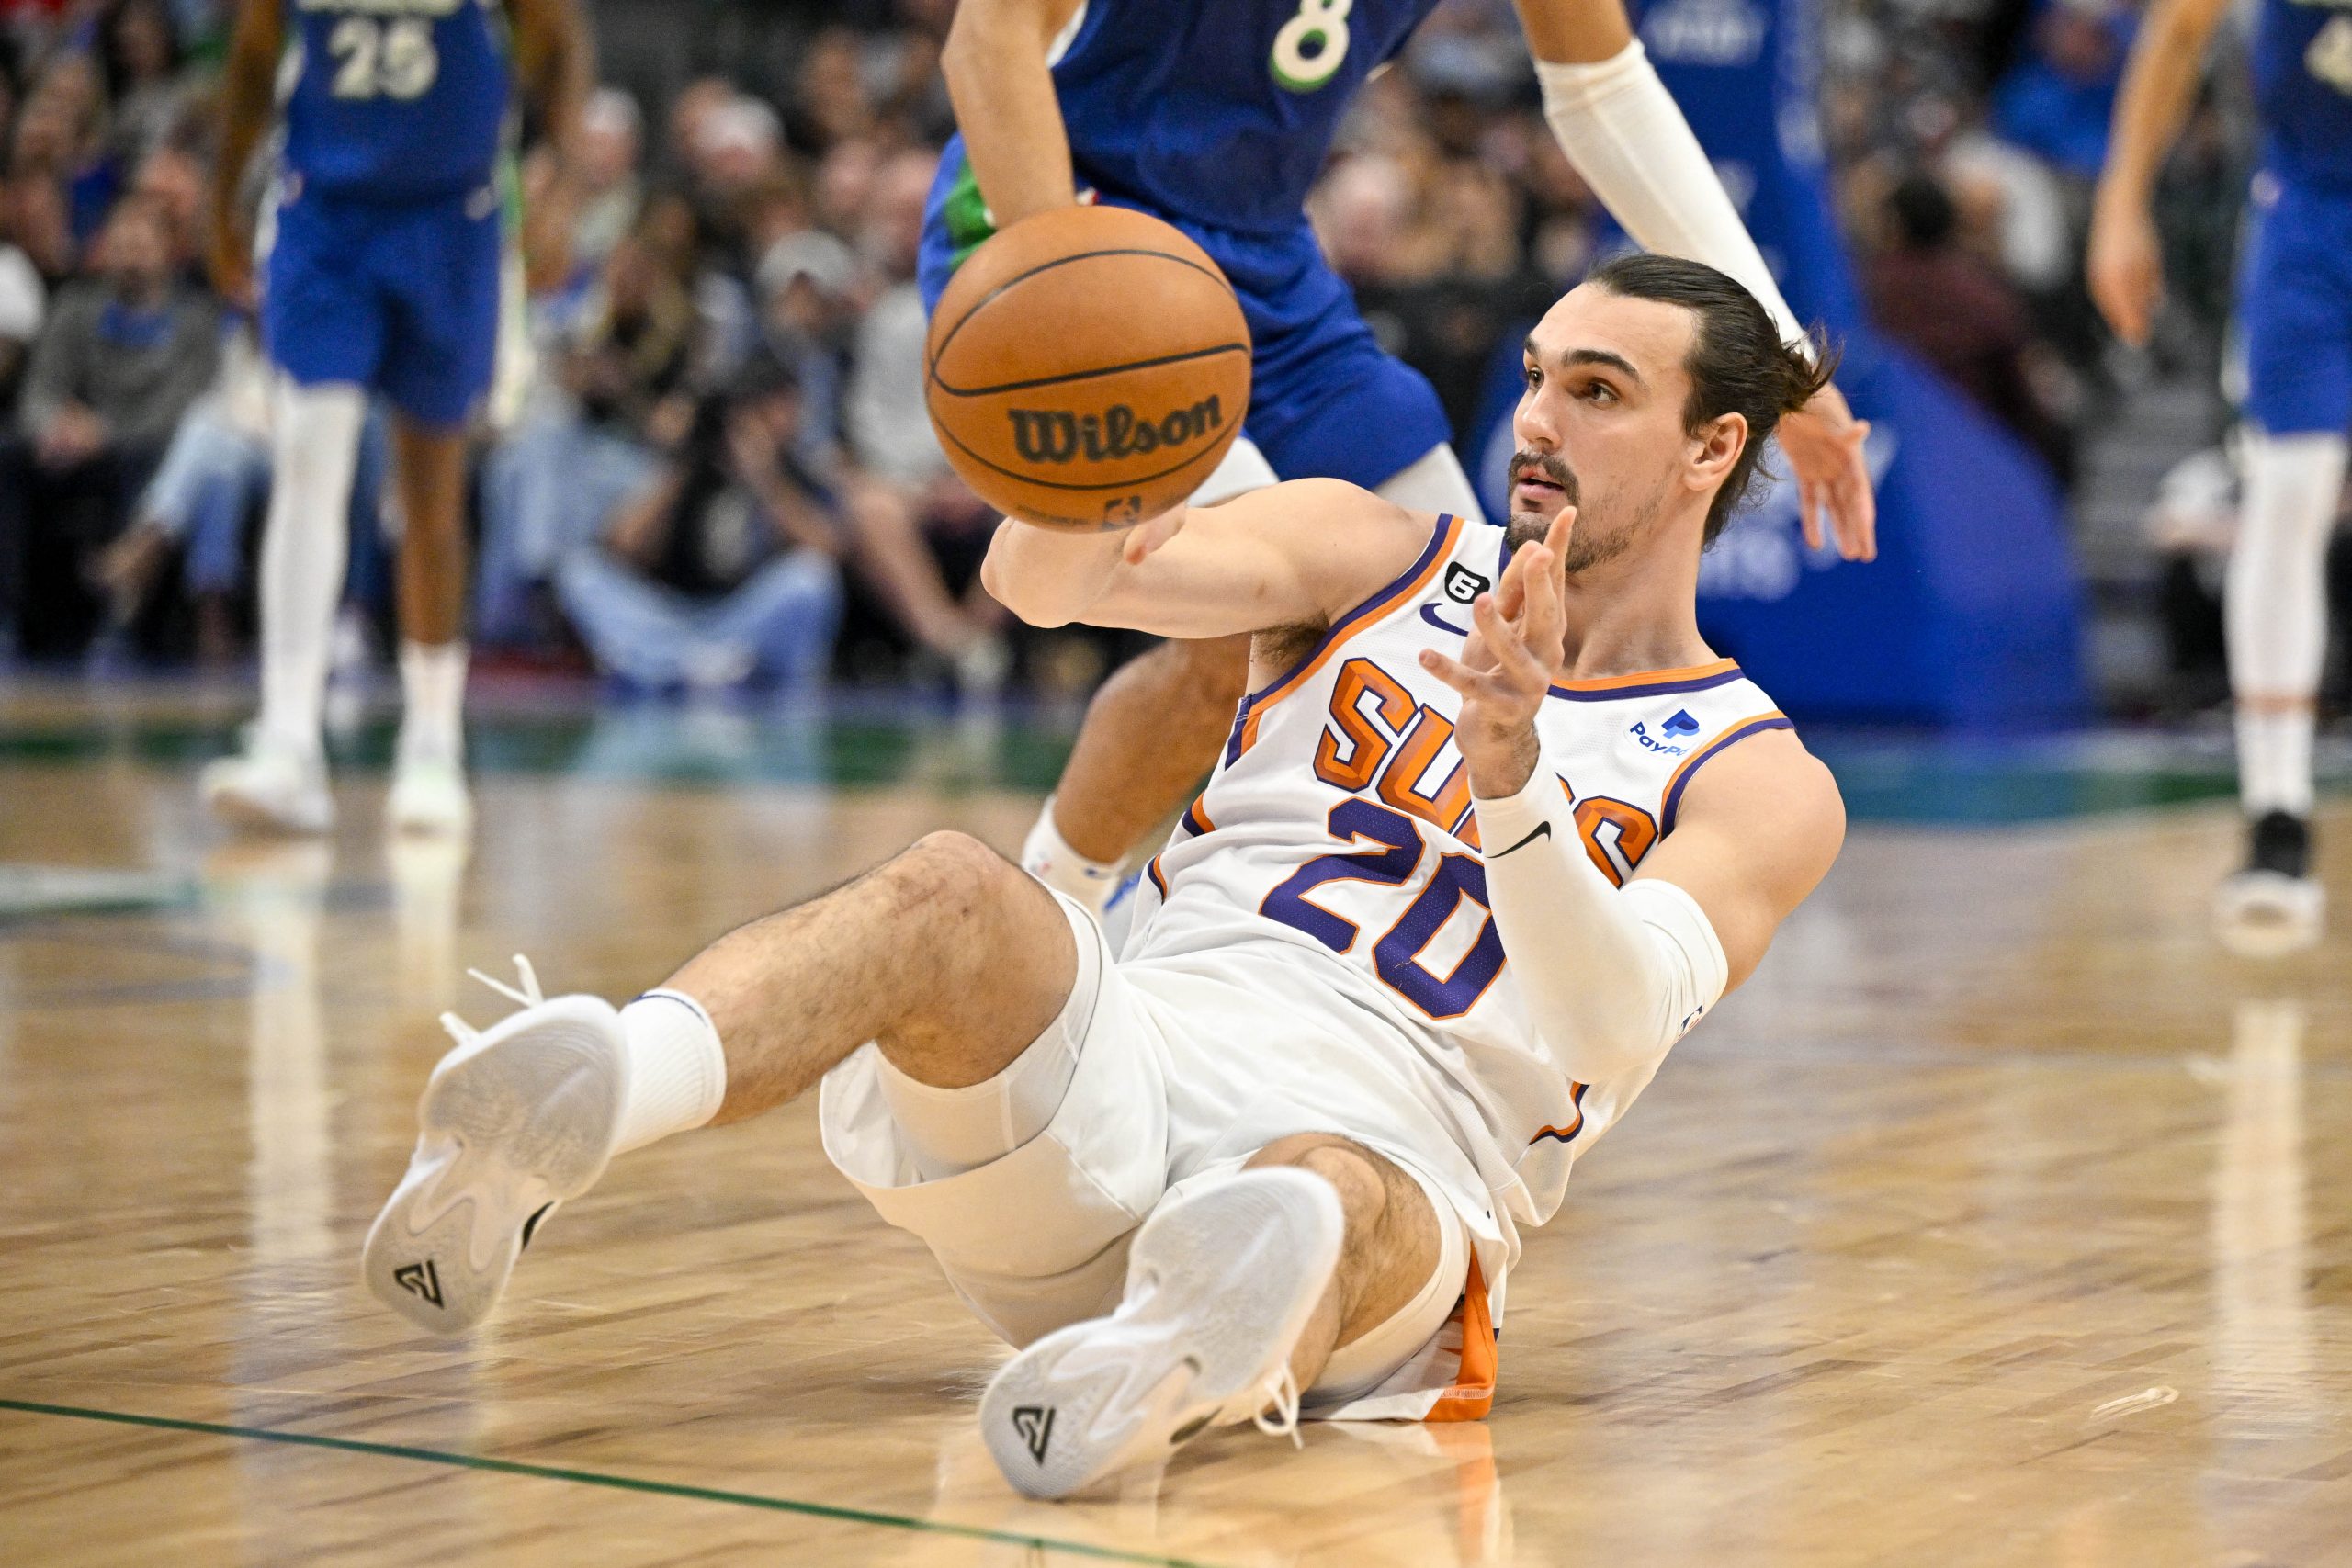 Dec 5, 2022; Dallas, Texas, USA; Phoenix Suns forward Dario Saric (20) passes the ball from the floor during the second half against the Dallas Mavericks at the American Airlines Center. Mandatory Credit: Jerome Miron-USA TODAY Sports